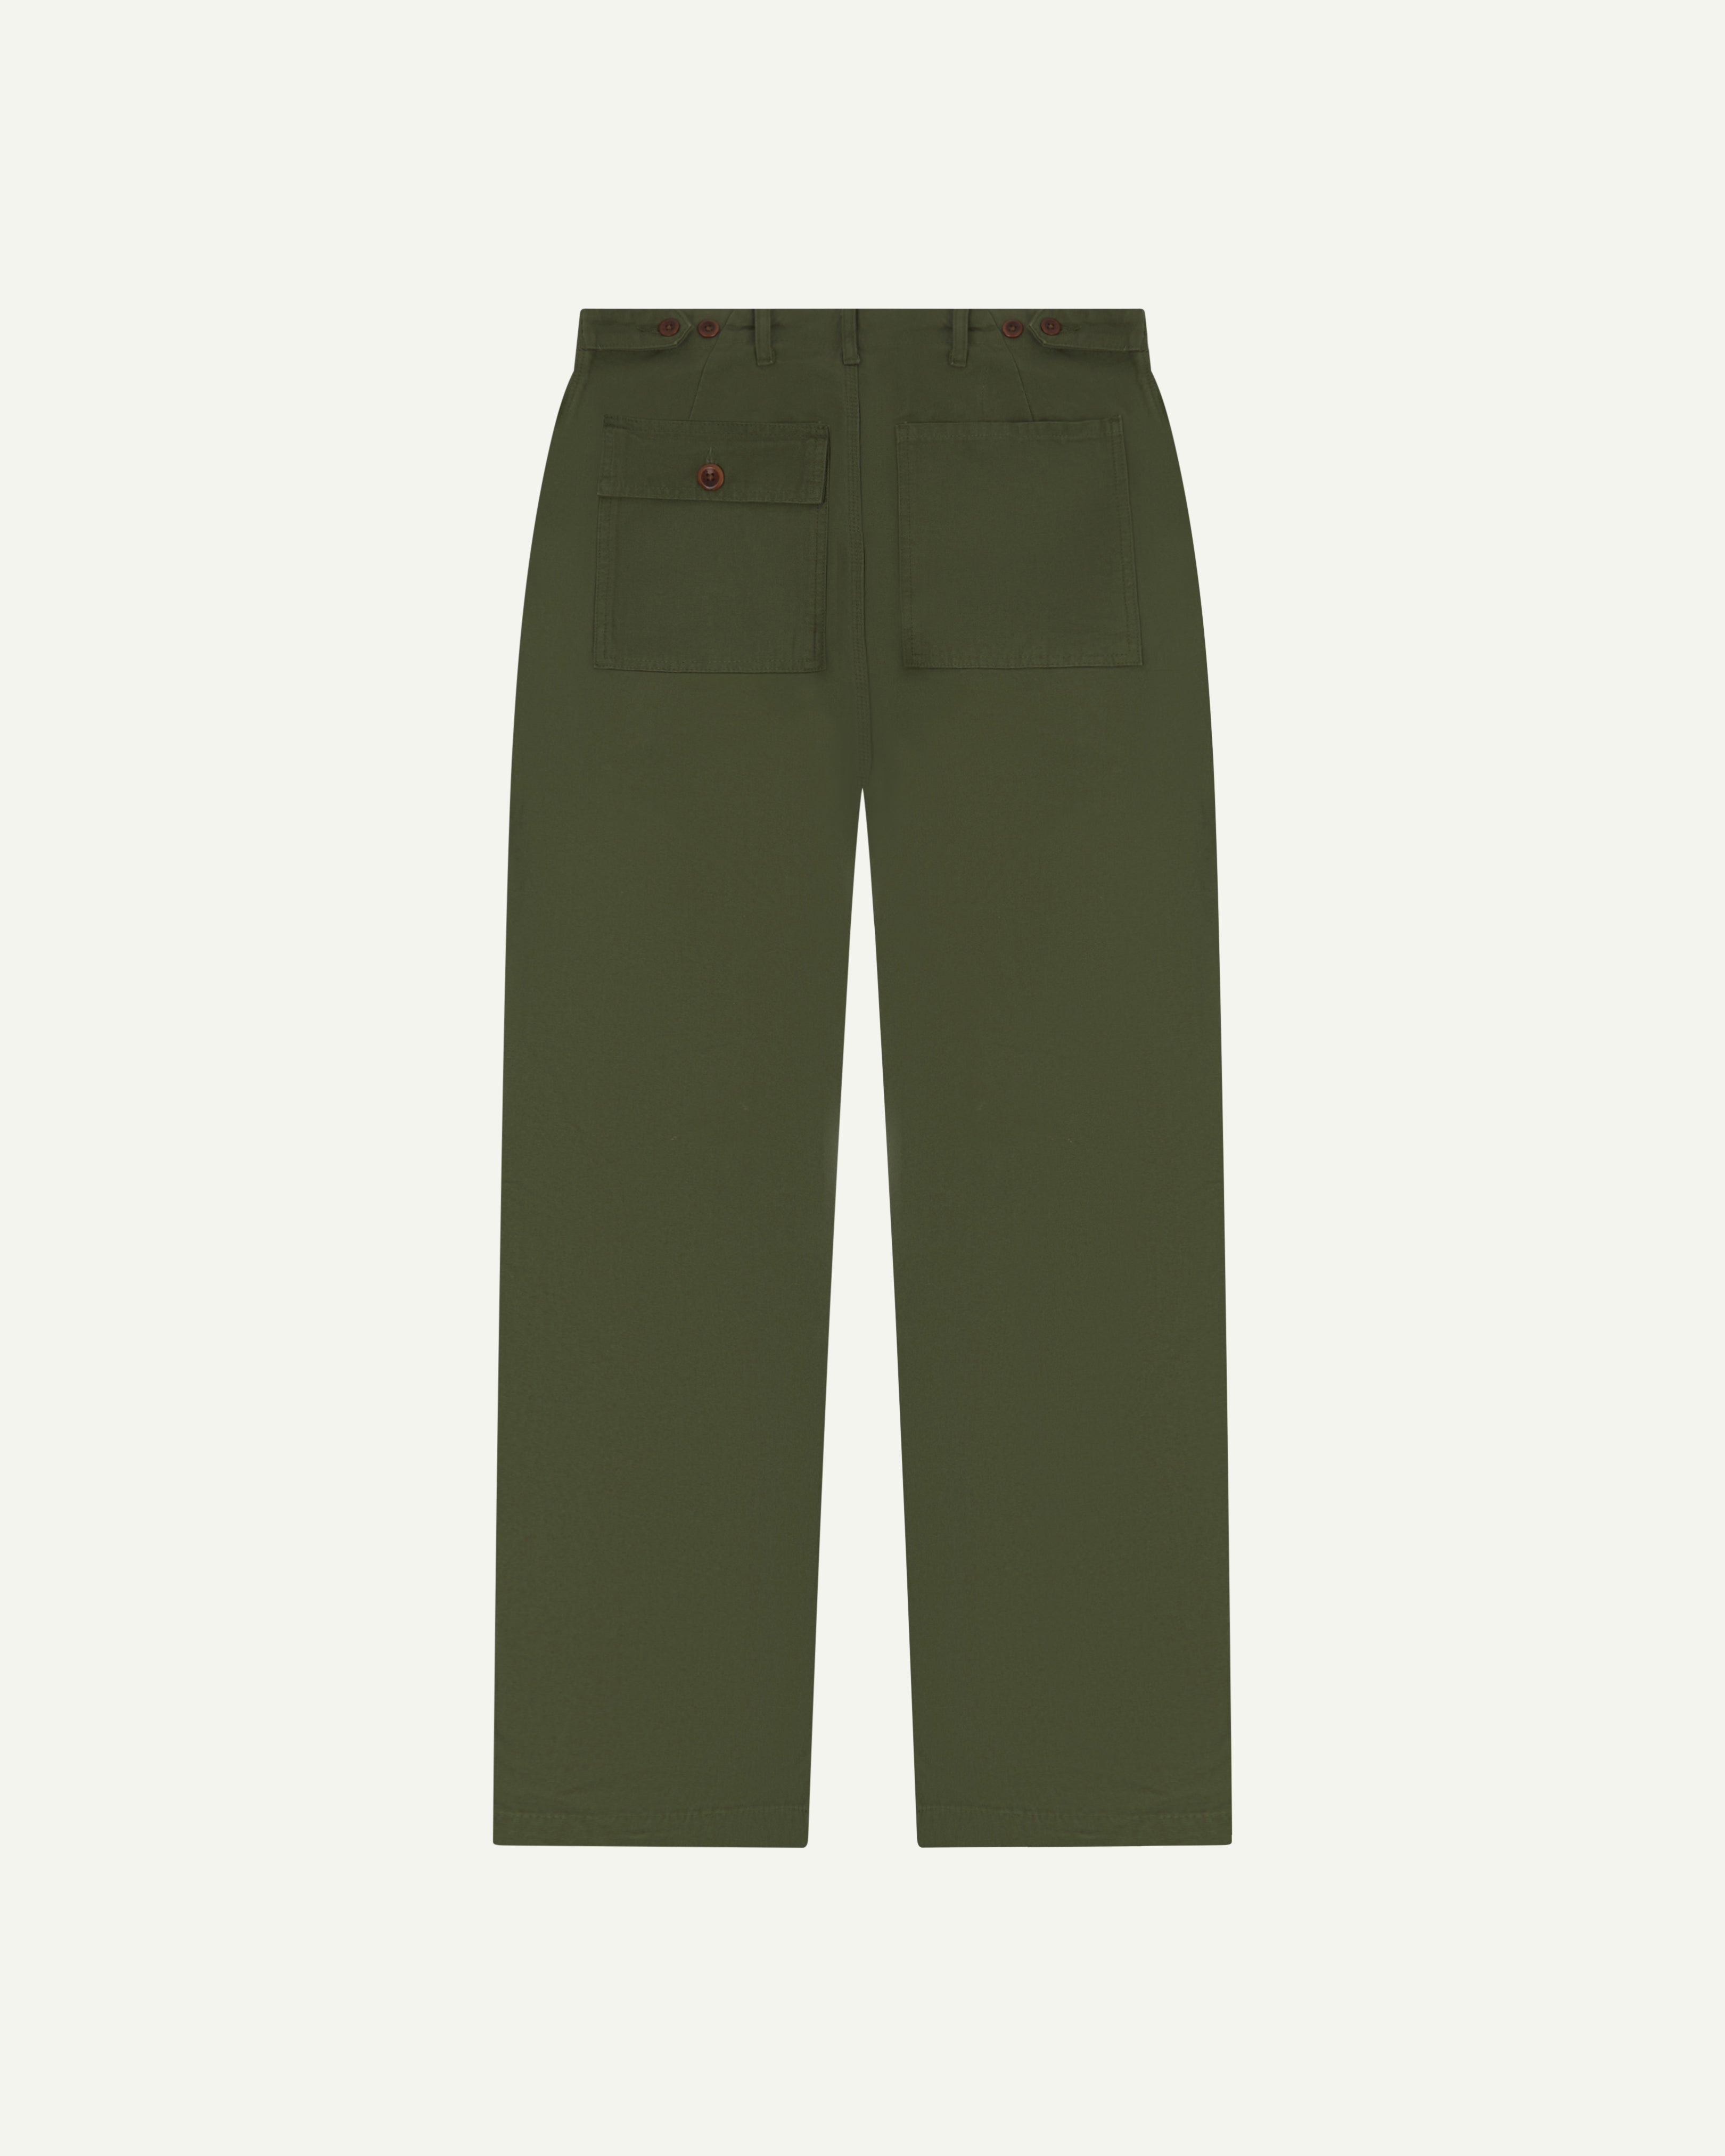 Back view of #5005 Uskees organic cotton mid-green men's trousers on white background.